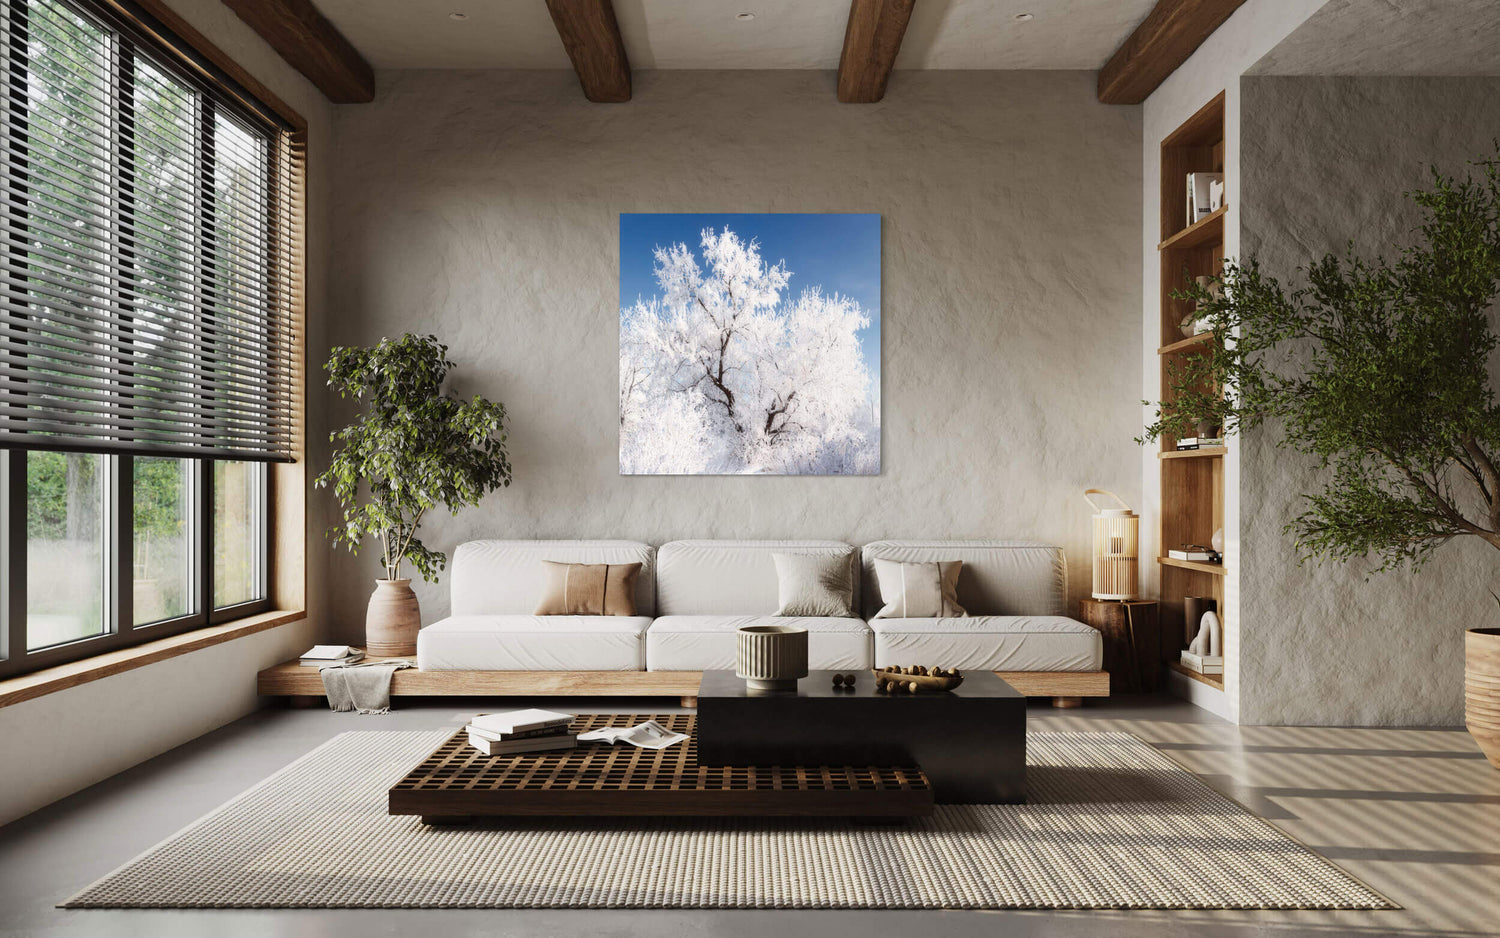 A piece of Boulder art showing a frozen tree in Colorado hangs in a living room.